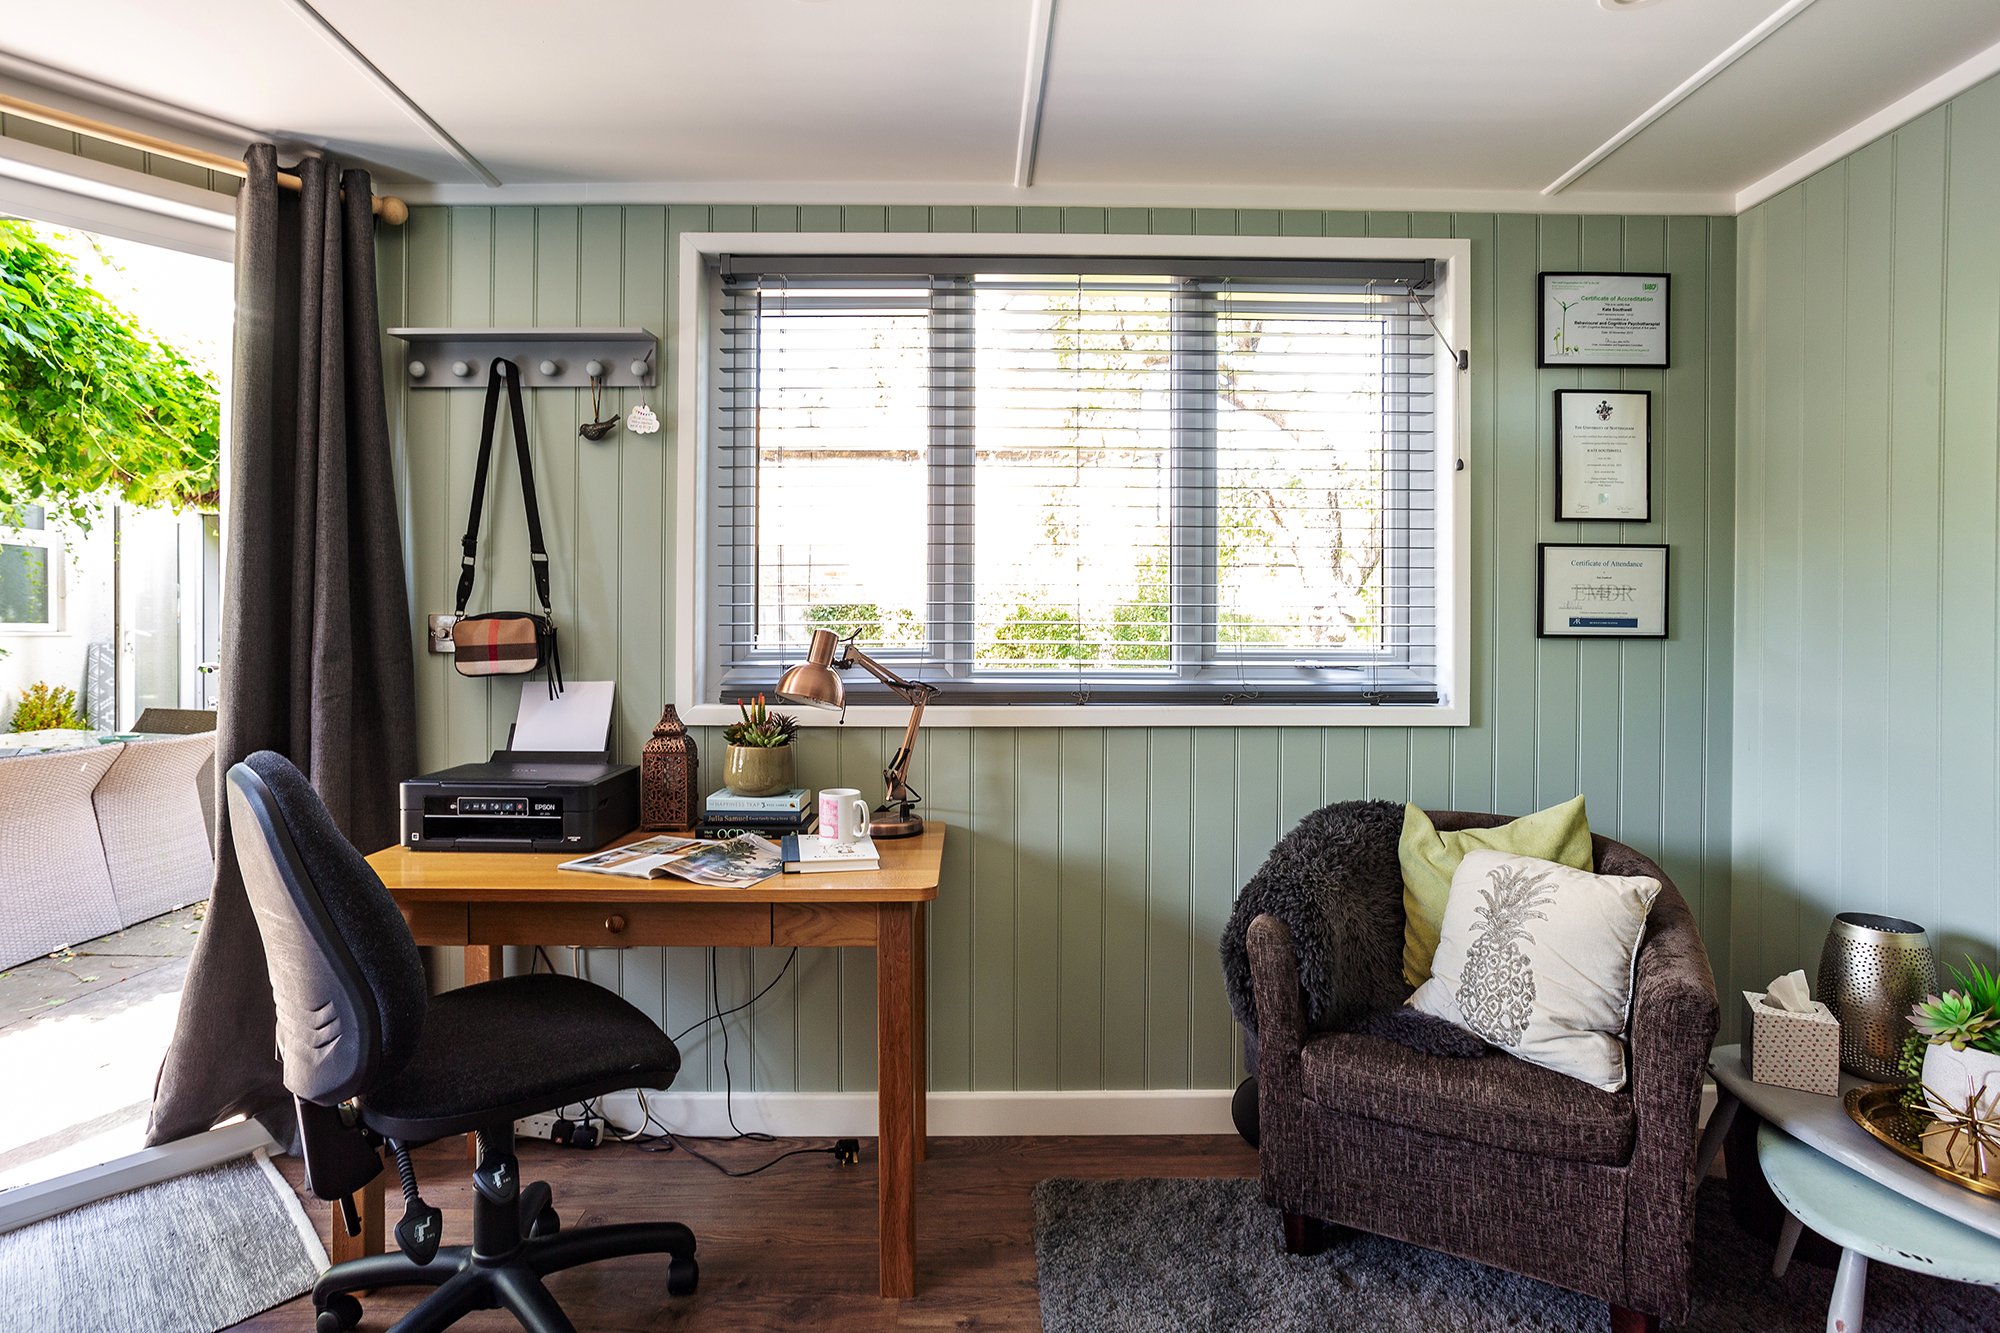 Insulated Garden office with sage green walls, desk, chair and comfy seating